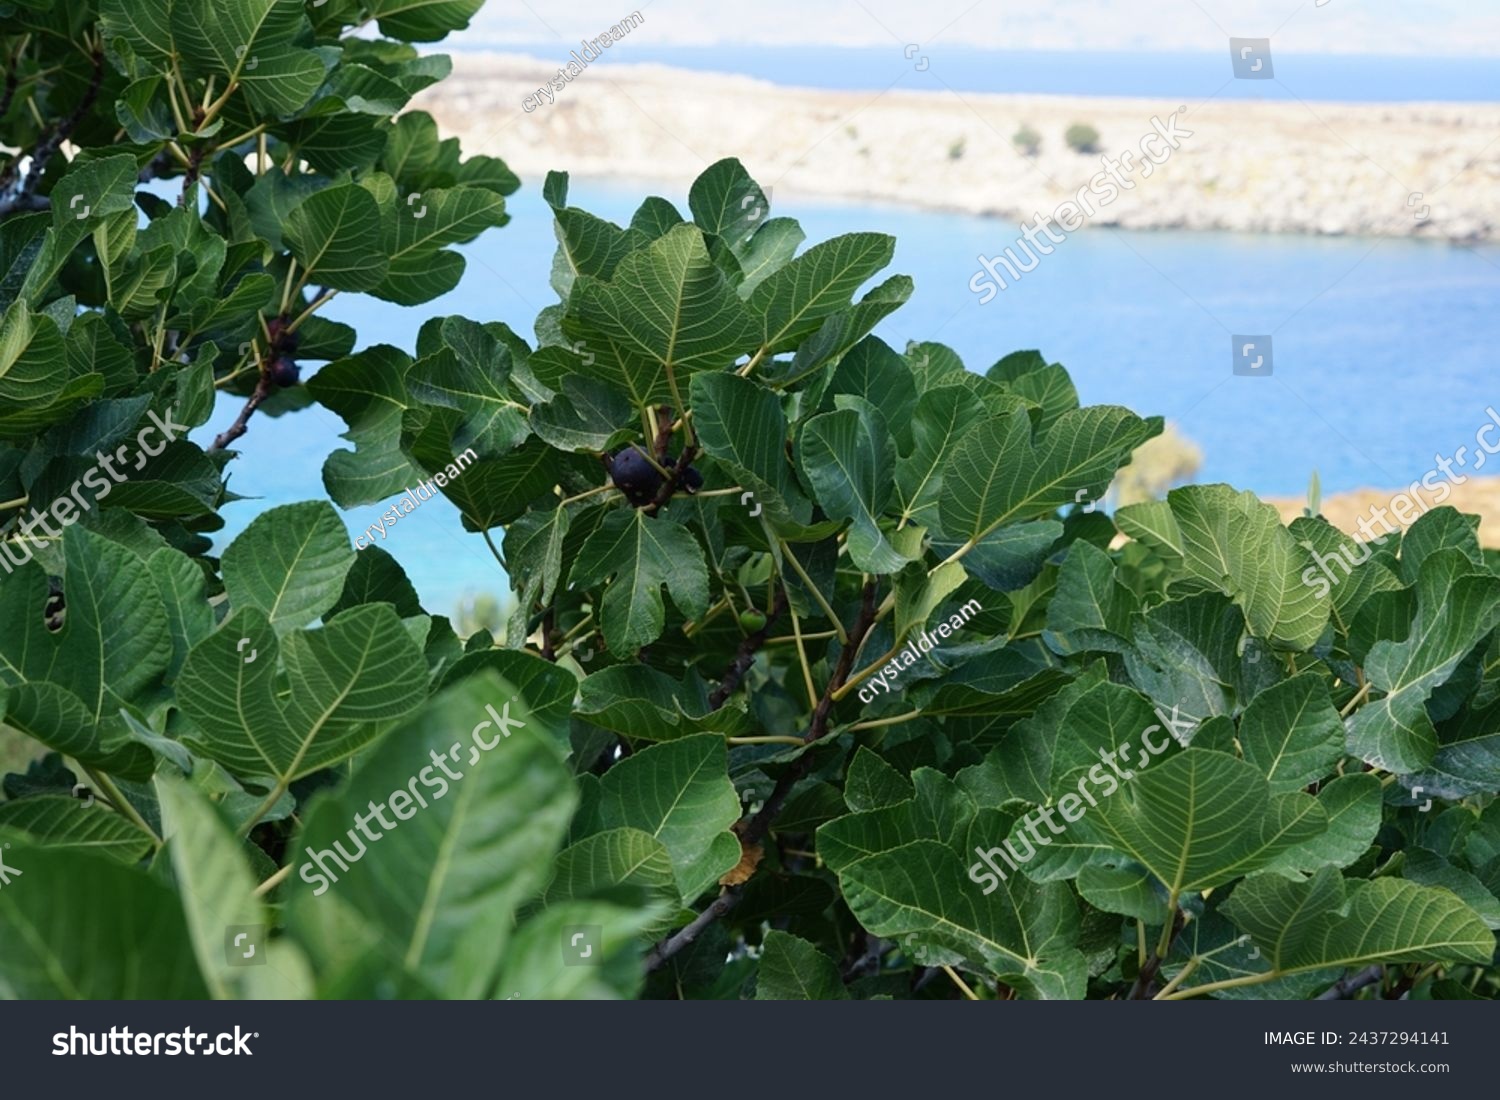 Ficus carica with fruits grows in August. The fig is the edible fruit of Ficus carica, a species of small tree in the flowering plant family Moraceae. Rhodes Island, Greece #2437294141